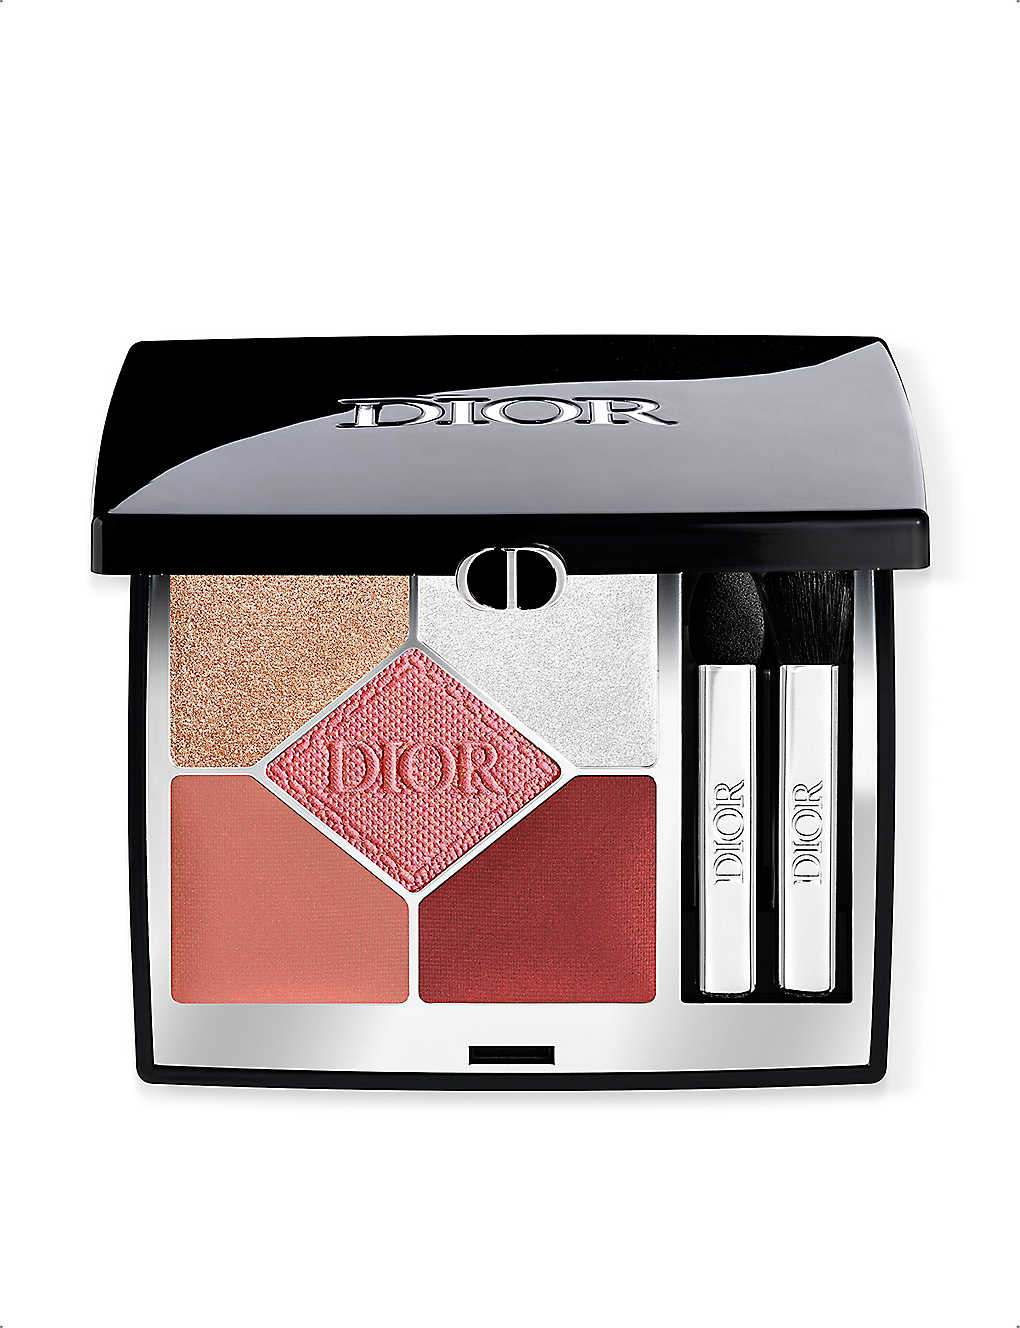 Dior 843 Subtle Bloom Show 5 Couleurs Limited-edition Eyeshadow Palette 7g